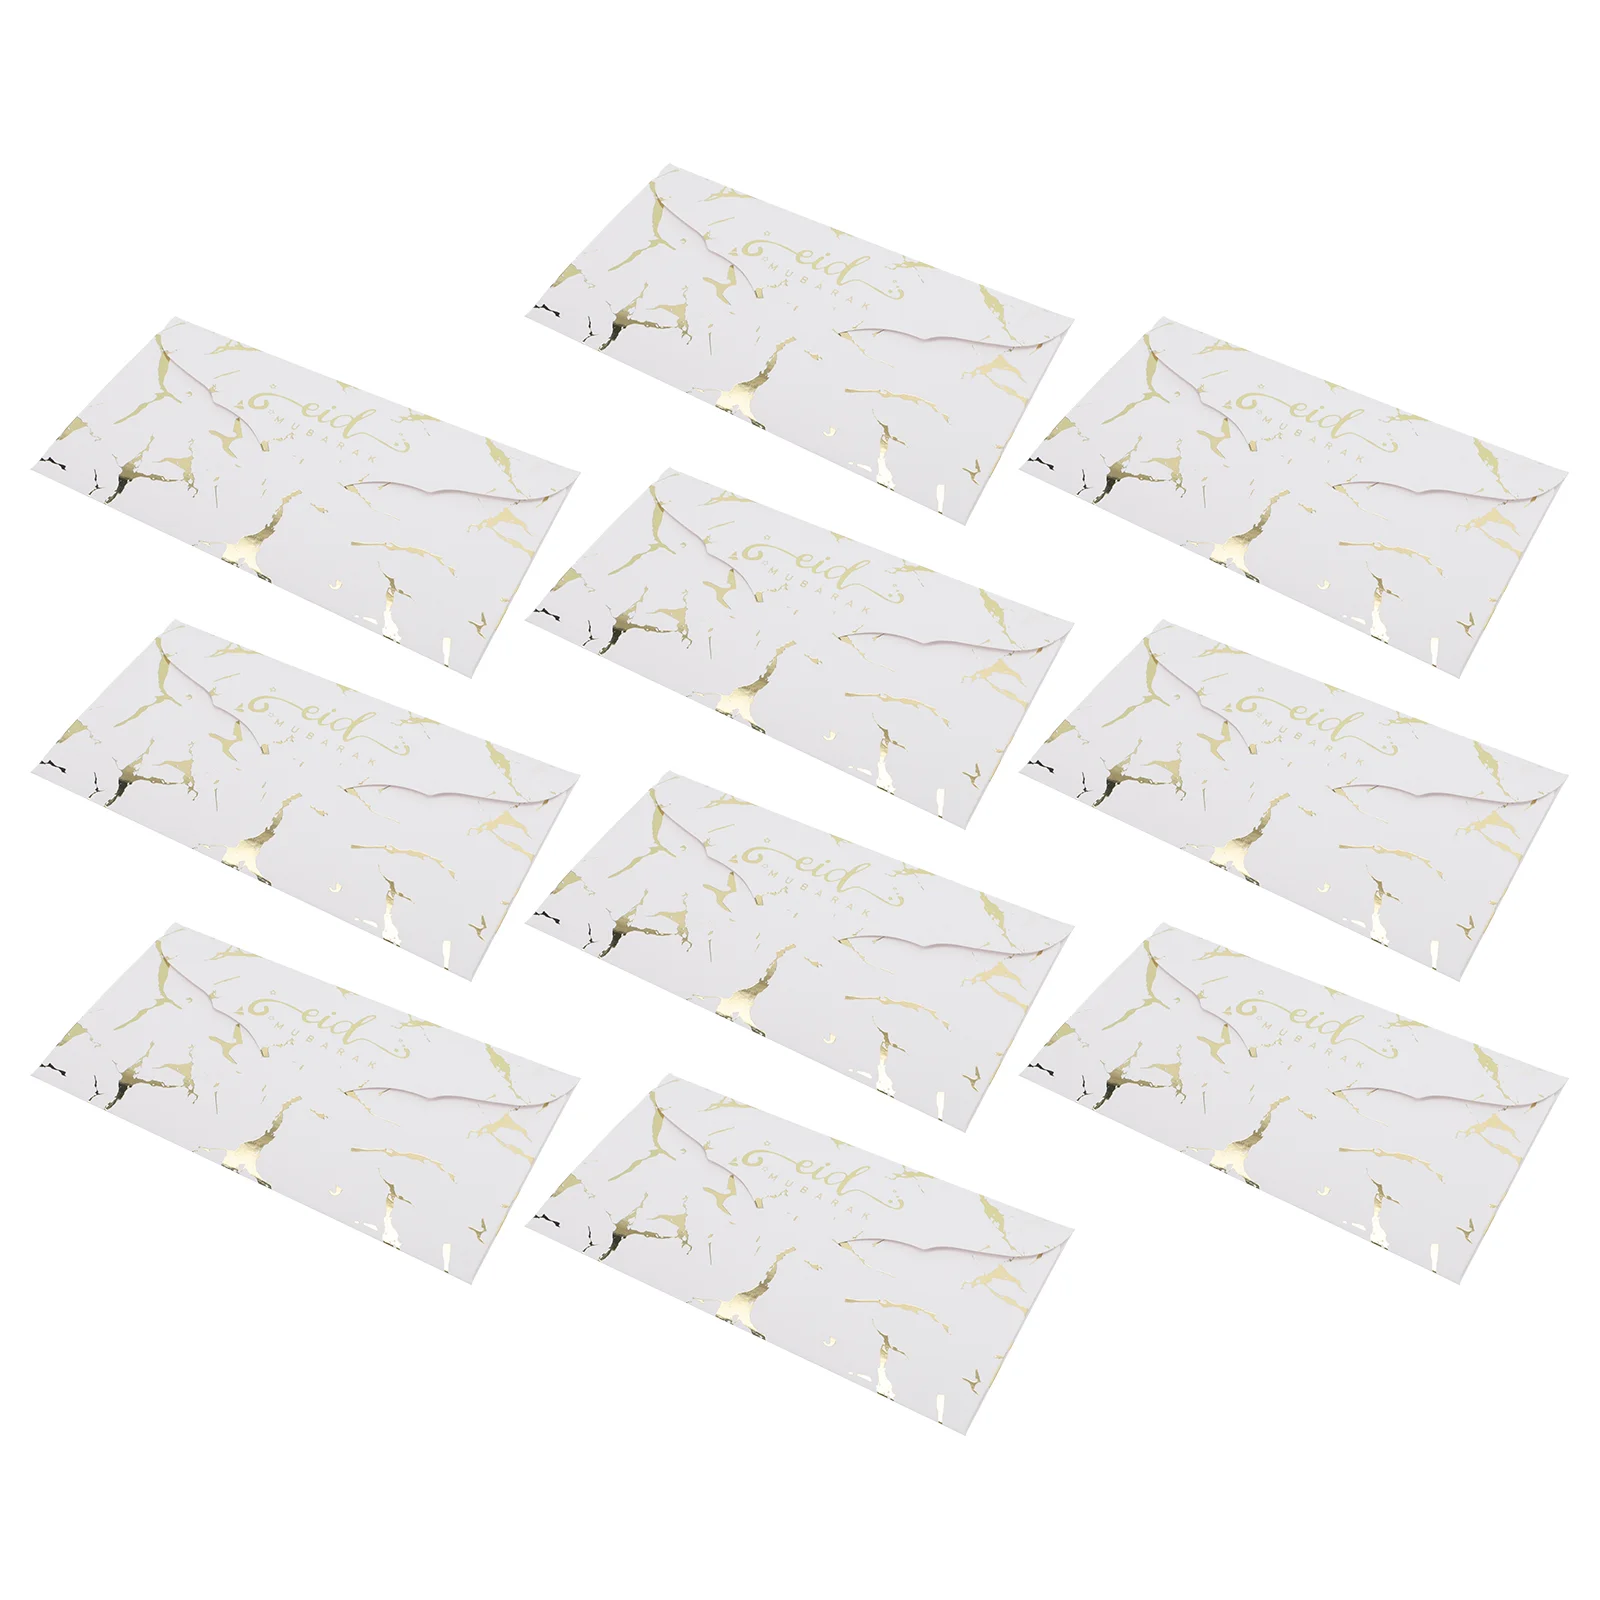 

10 Pcs Eid Envelope Wedding Decor Supply Muslim Envelopes Blank Decorative Paper Wrapping Exquisite Packet